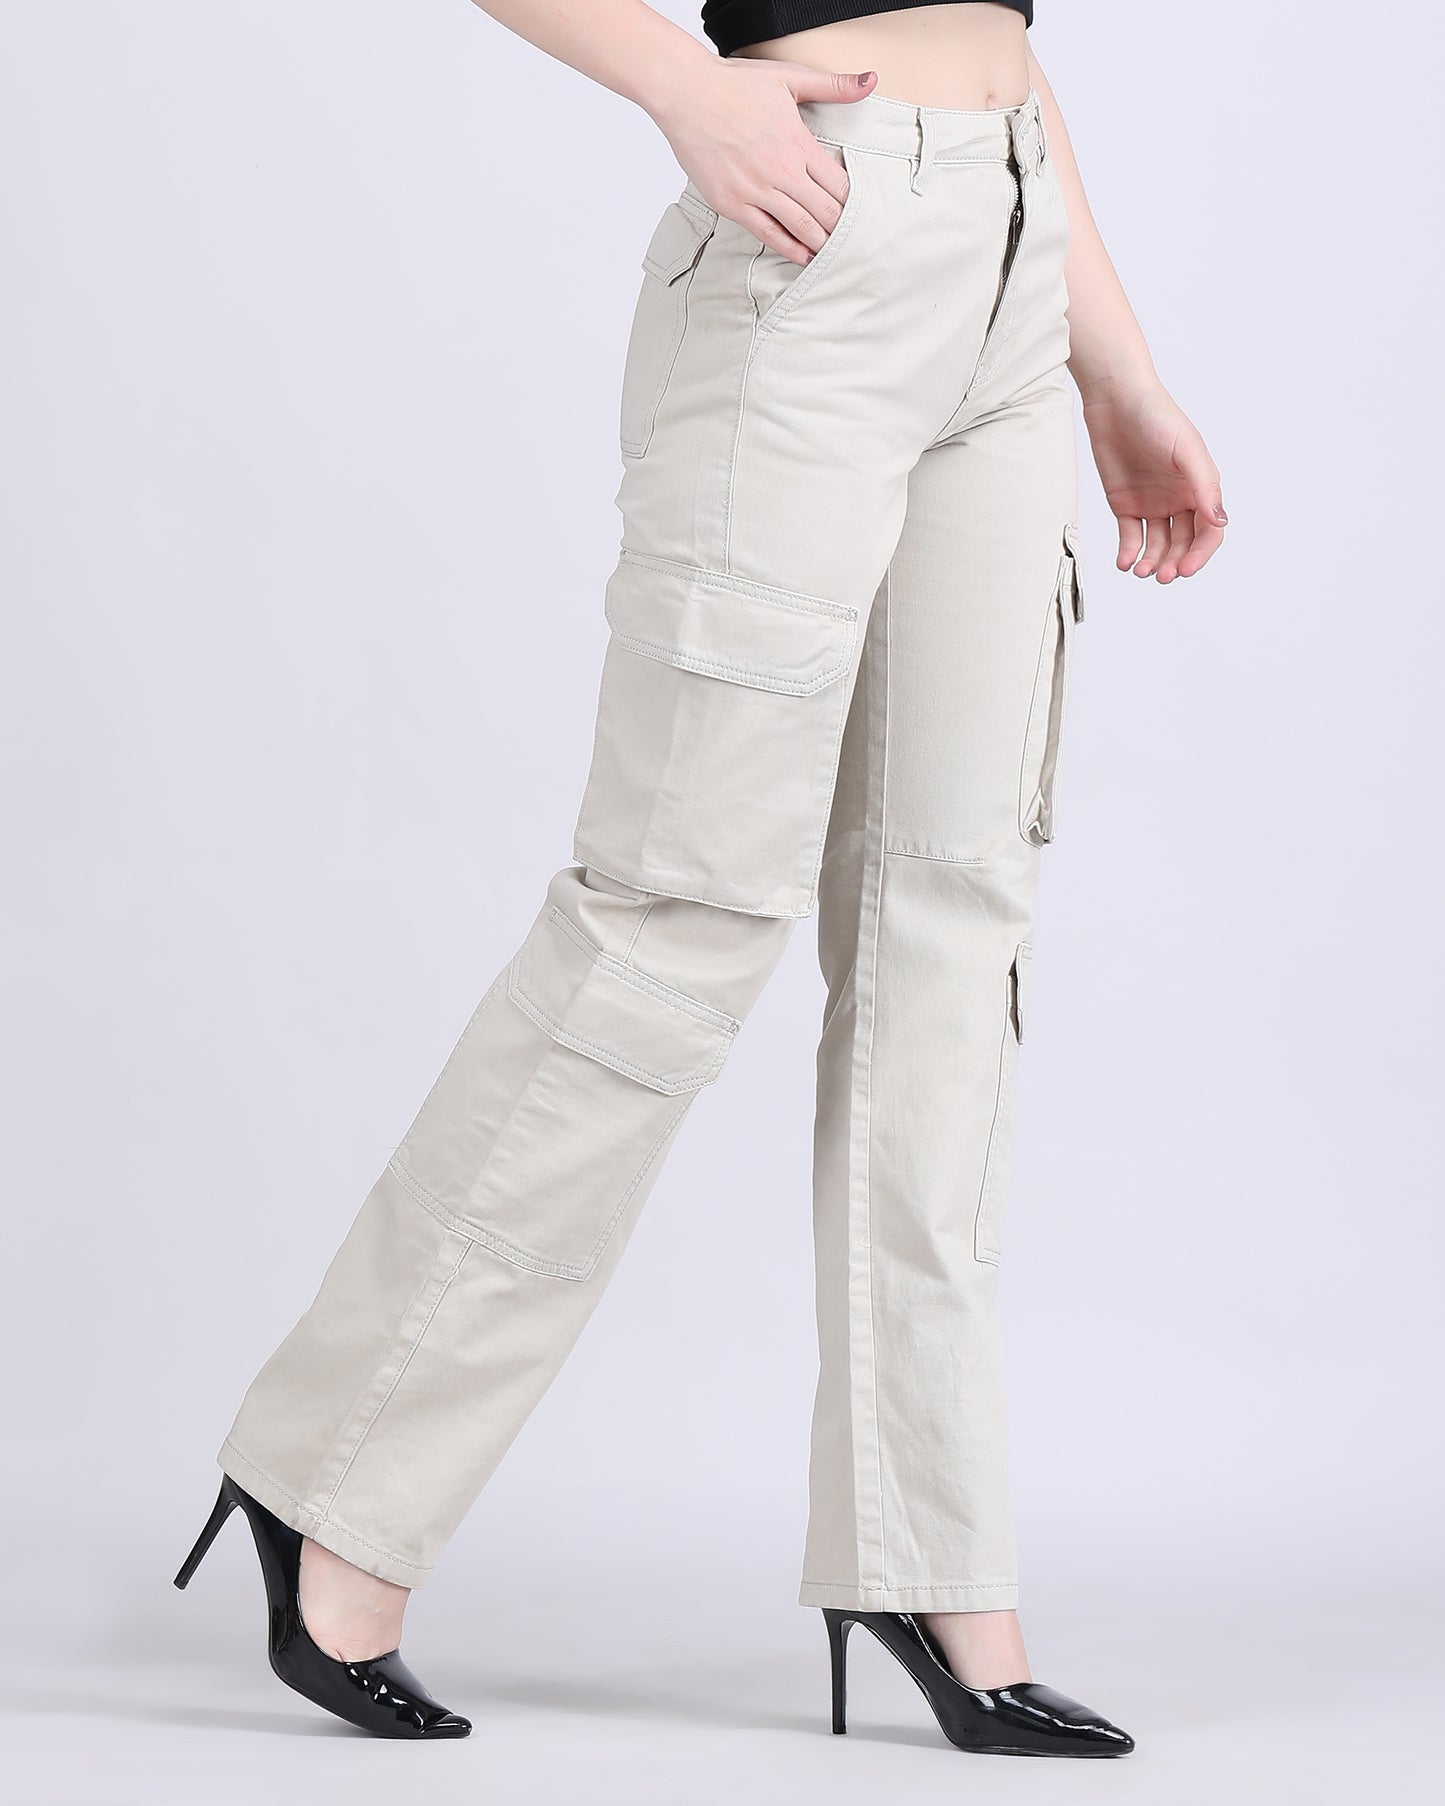 STRAIGHT FIT CARGO,beige, bottomwear, cargos, cotton, full length, mid rise waist, straight fit, utility pocket,cargo-straight-fit-trouser-beige,Length - Full lengthWaist - Mid-rise waistFit - Straight fitColor - CreamNo. of Pockets - 8Material - Cotton twillLength - 42 inchClosure - Zip &amp; button Detail - Utility-pocket